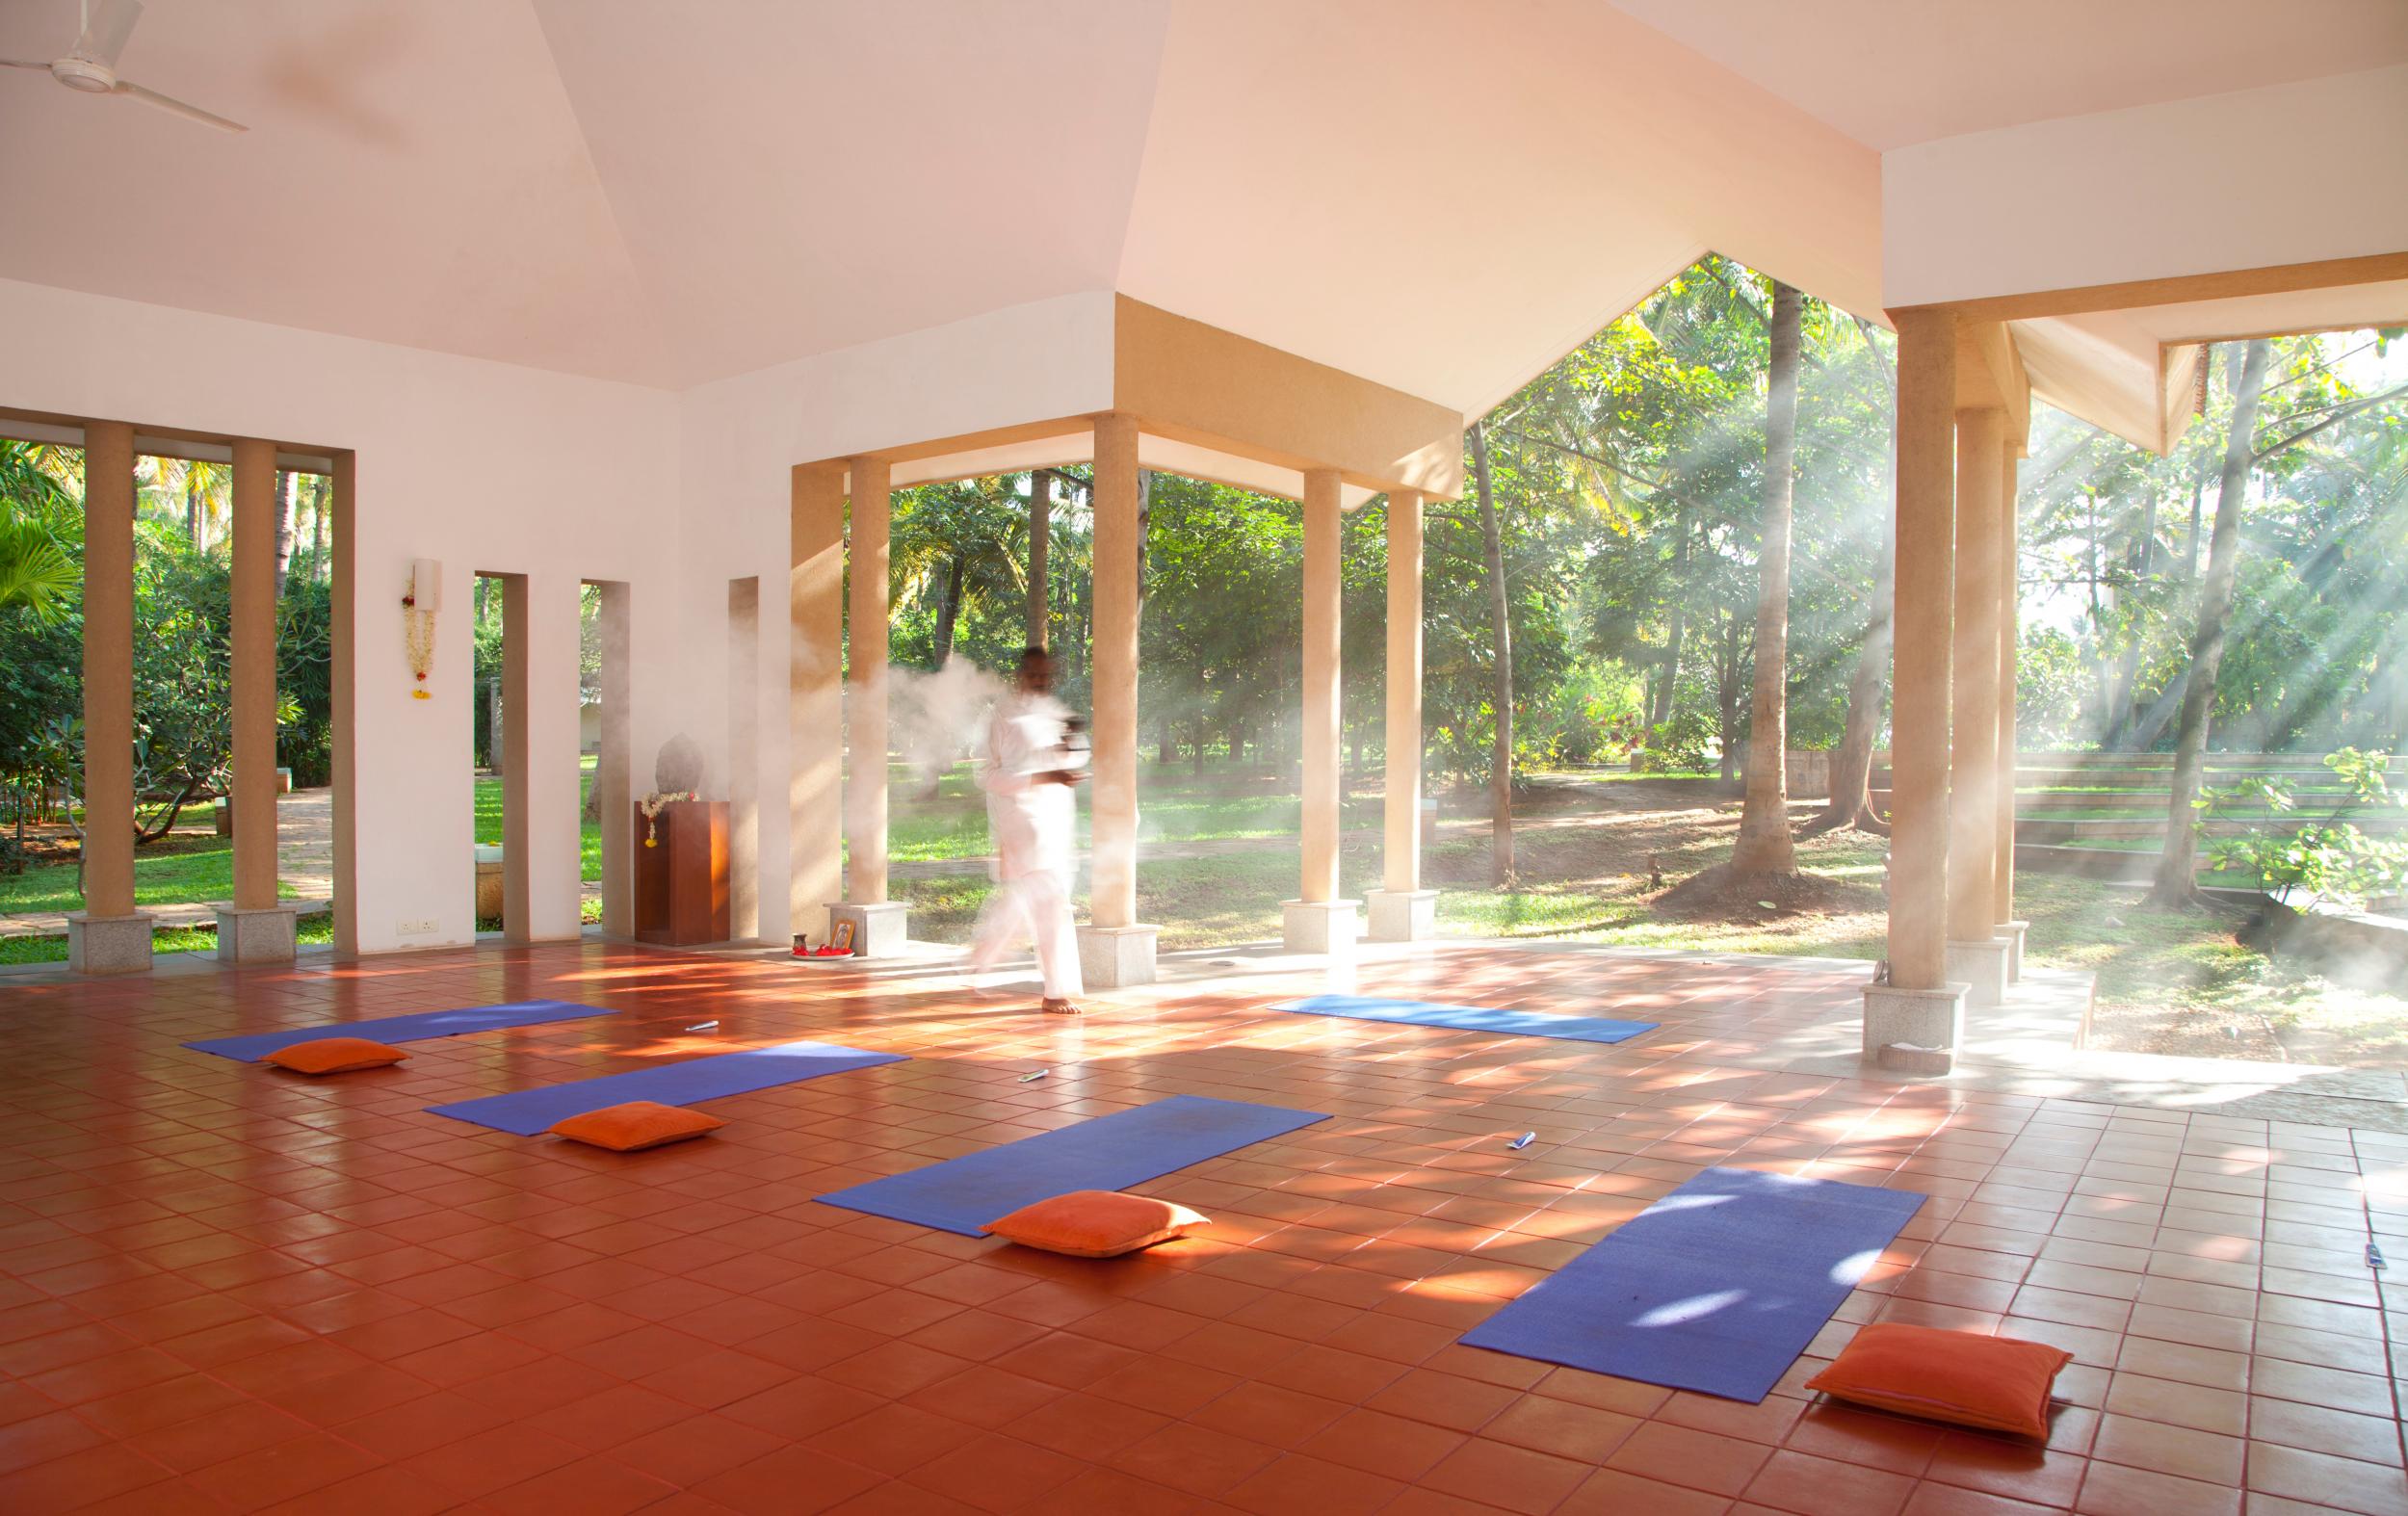 Guests wake up to morning yoga sessions